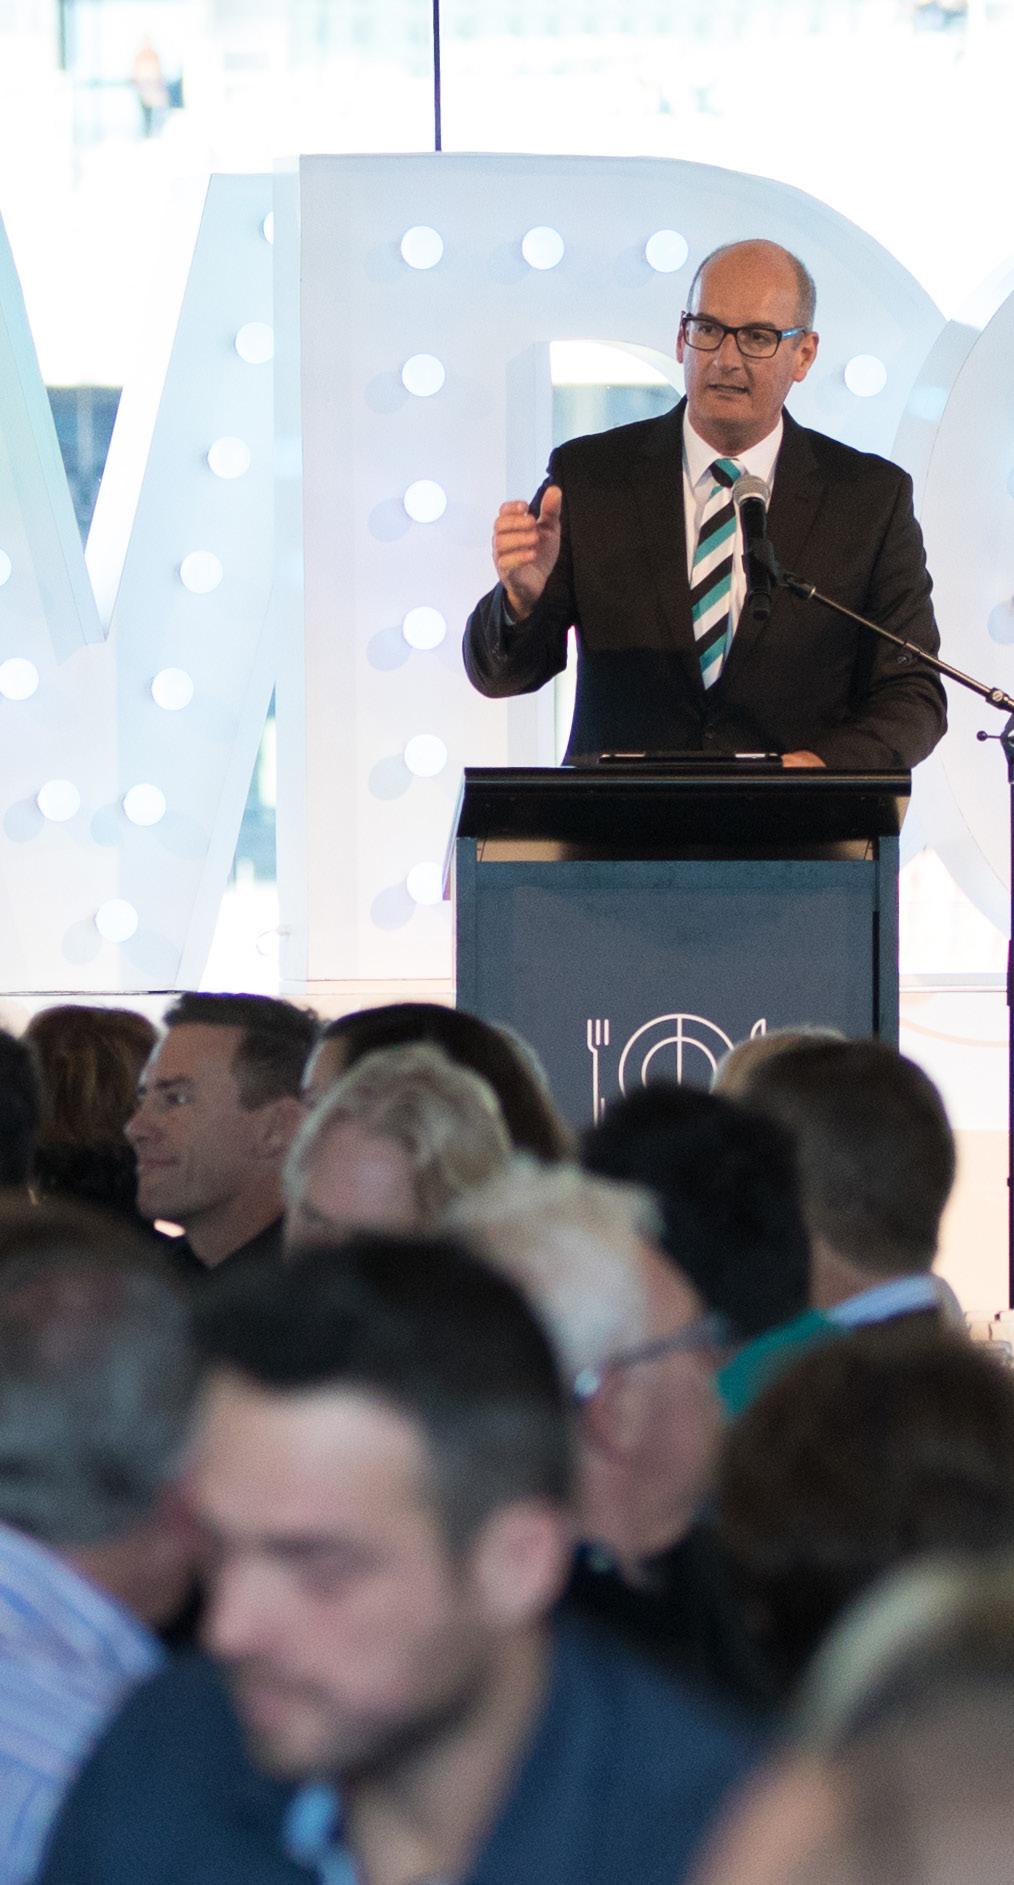 CAPTAIN S CLUB Two (2) tickets to six (6) Before the Bounce Events in 2019* the Season Launch Hall of Fame Business included in Port Adelaide Online Corporate Network One (1) Exclusive Captains Club